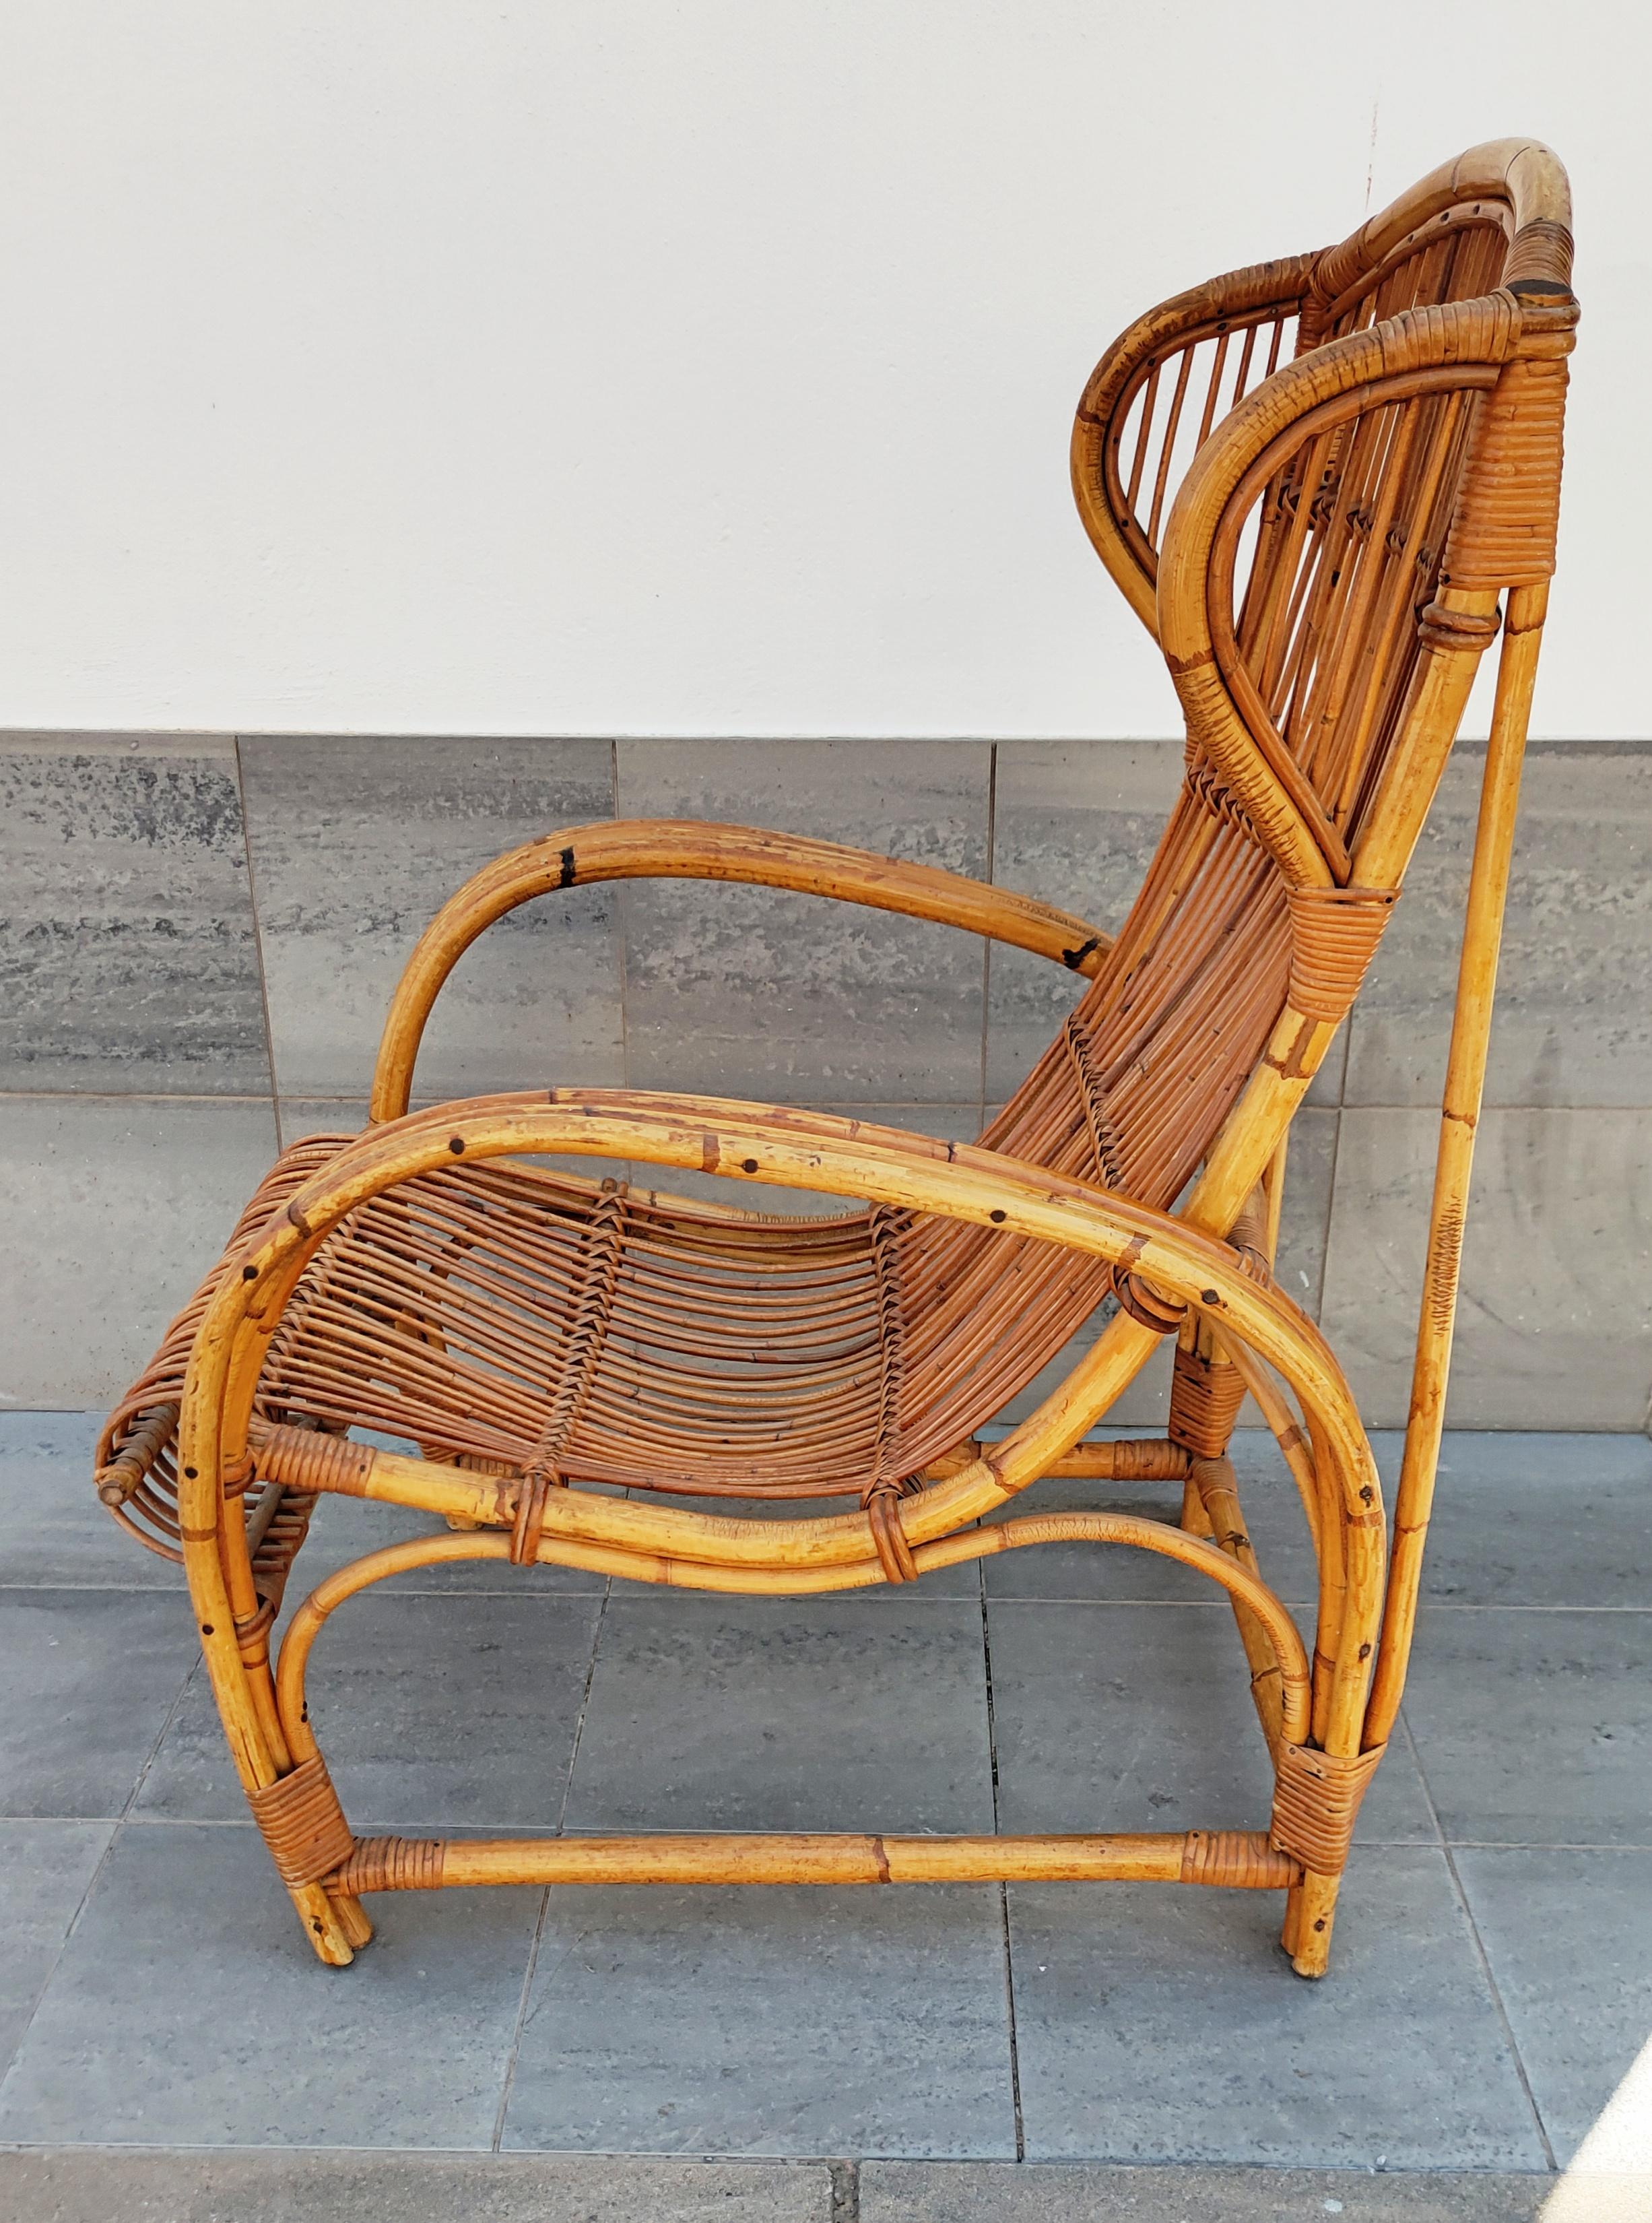 Rare and beautiful rattan and bamboo armchair manufactured in Italy in 1960s.
In perfect vintage condition.
Very confortable.